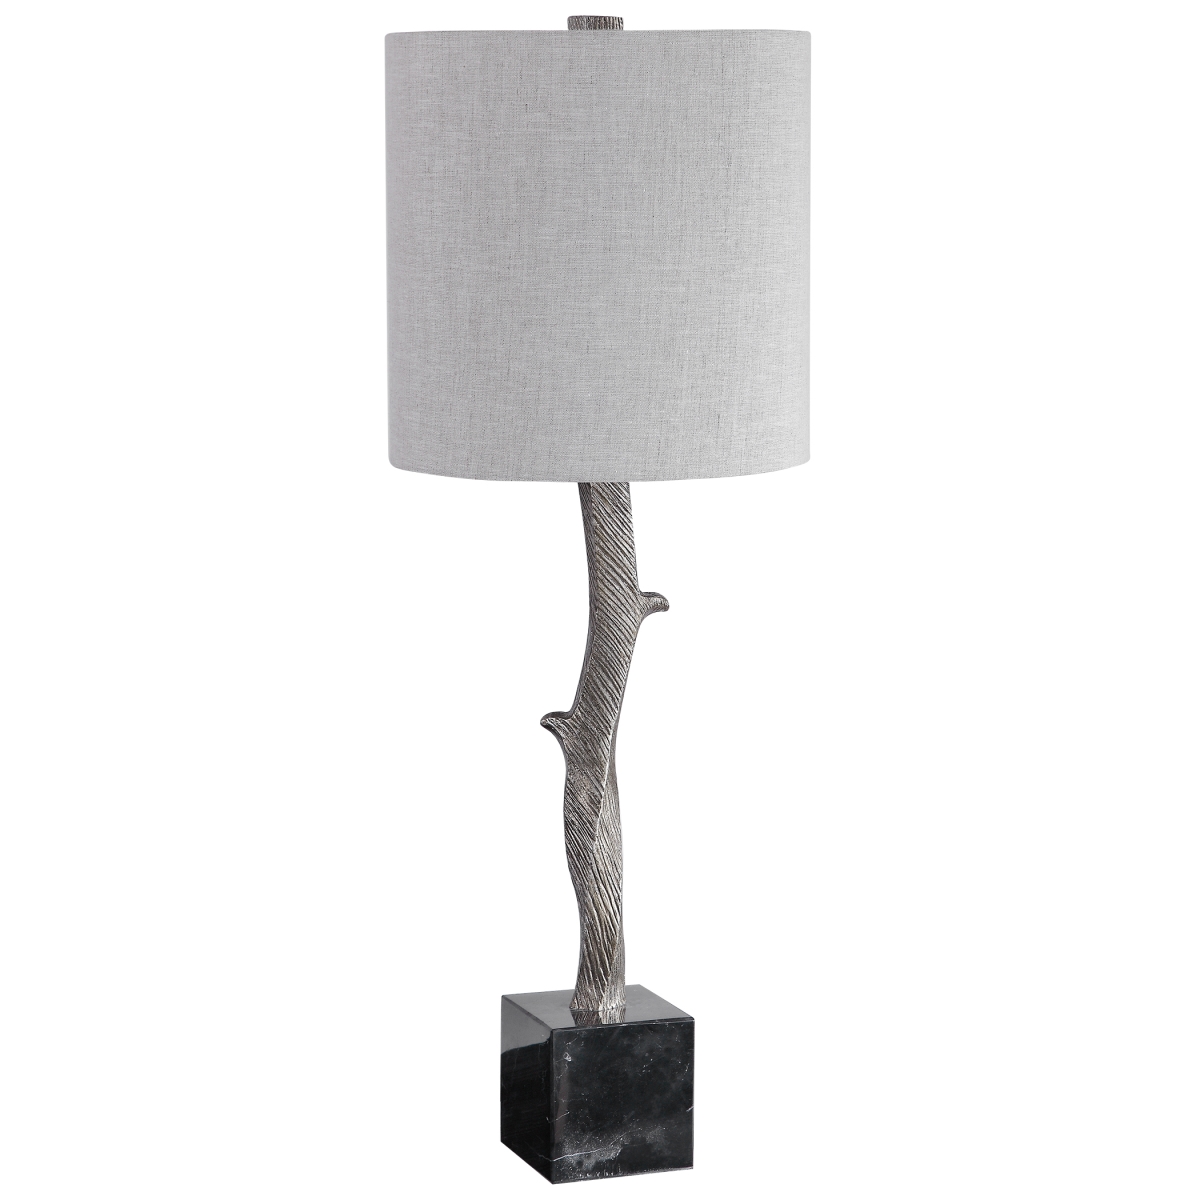 Picture of 212 Main 29694-1 Iver Branch Accent Lamp